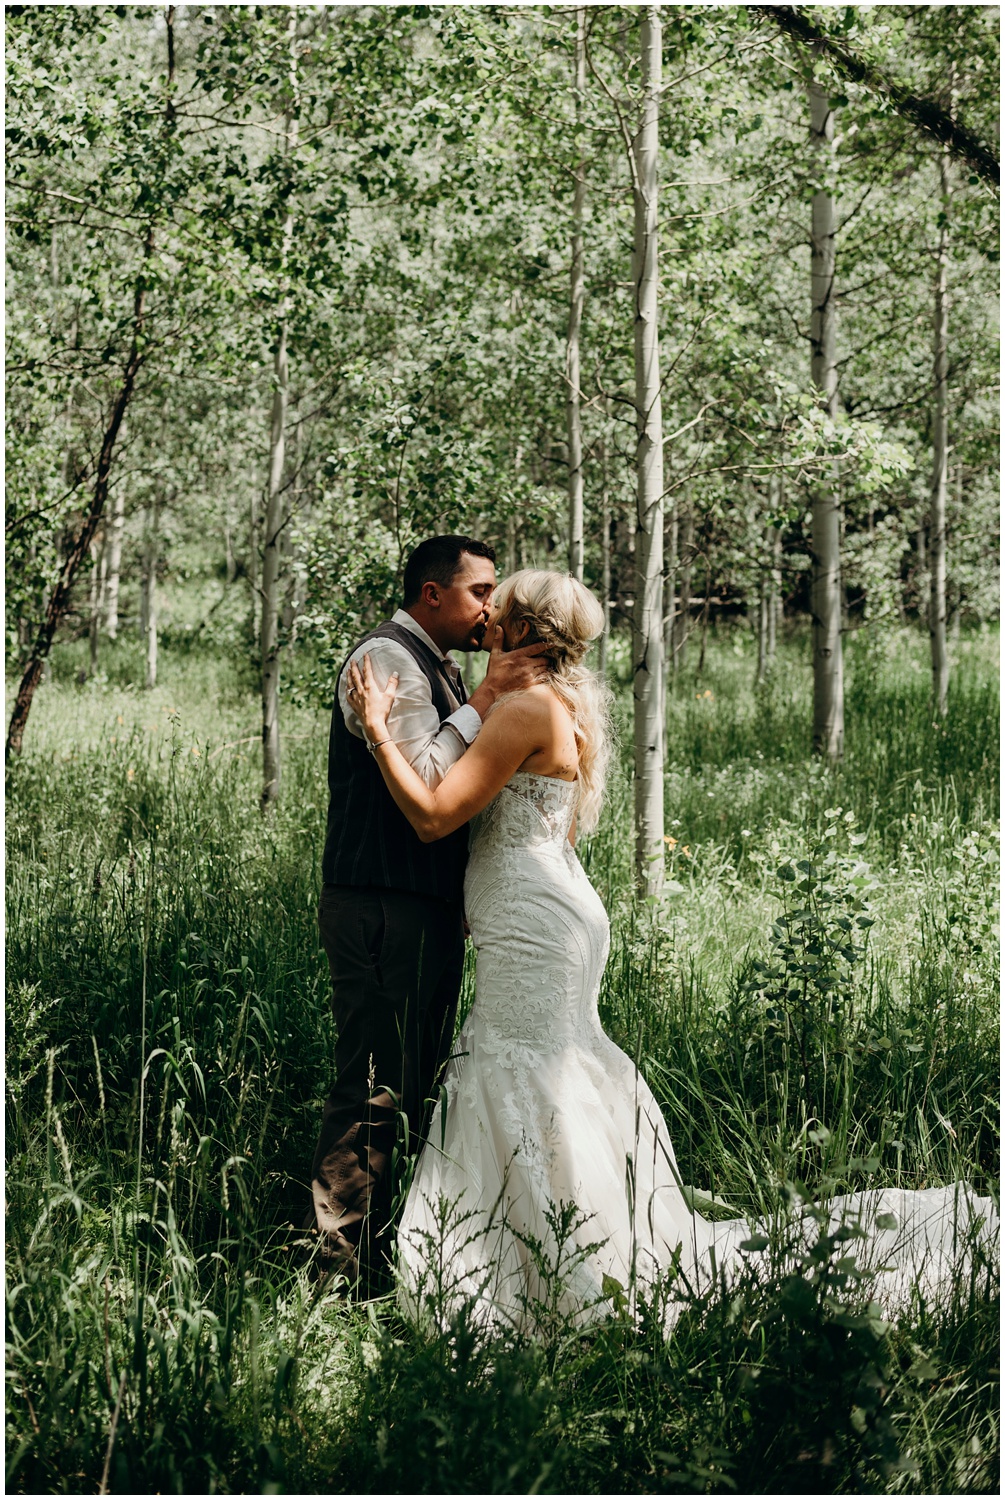 Outdoor wedding in Steamboat, Colorado documented with photojournalism